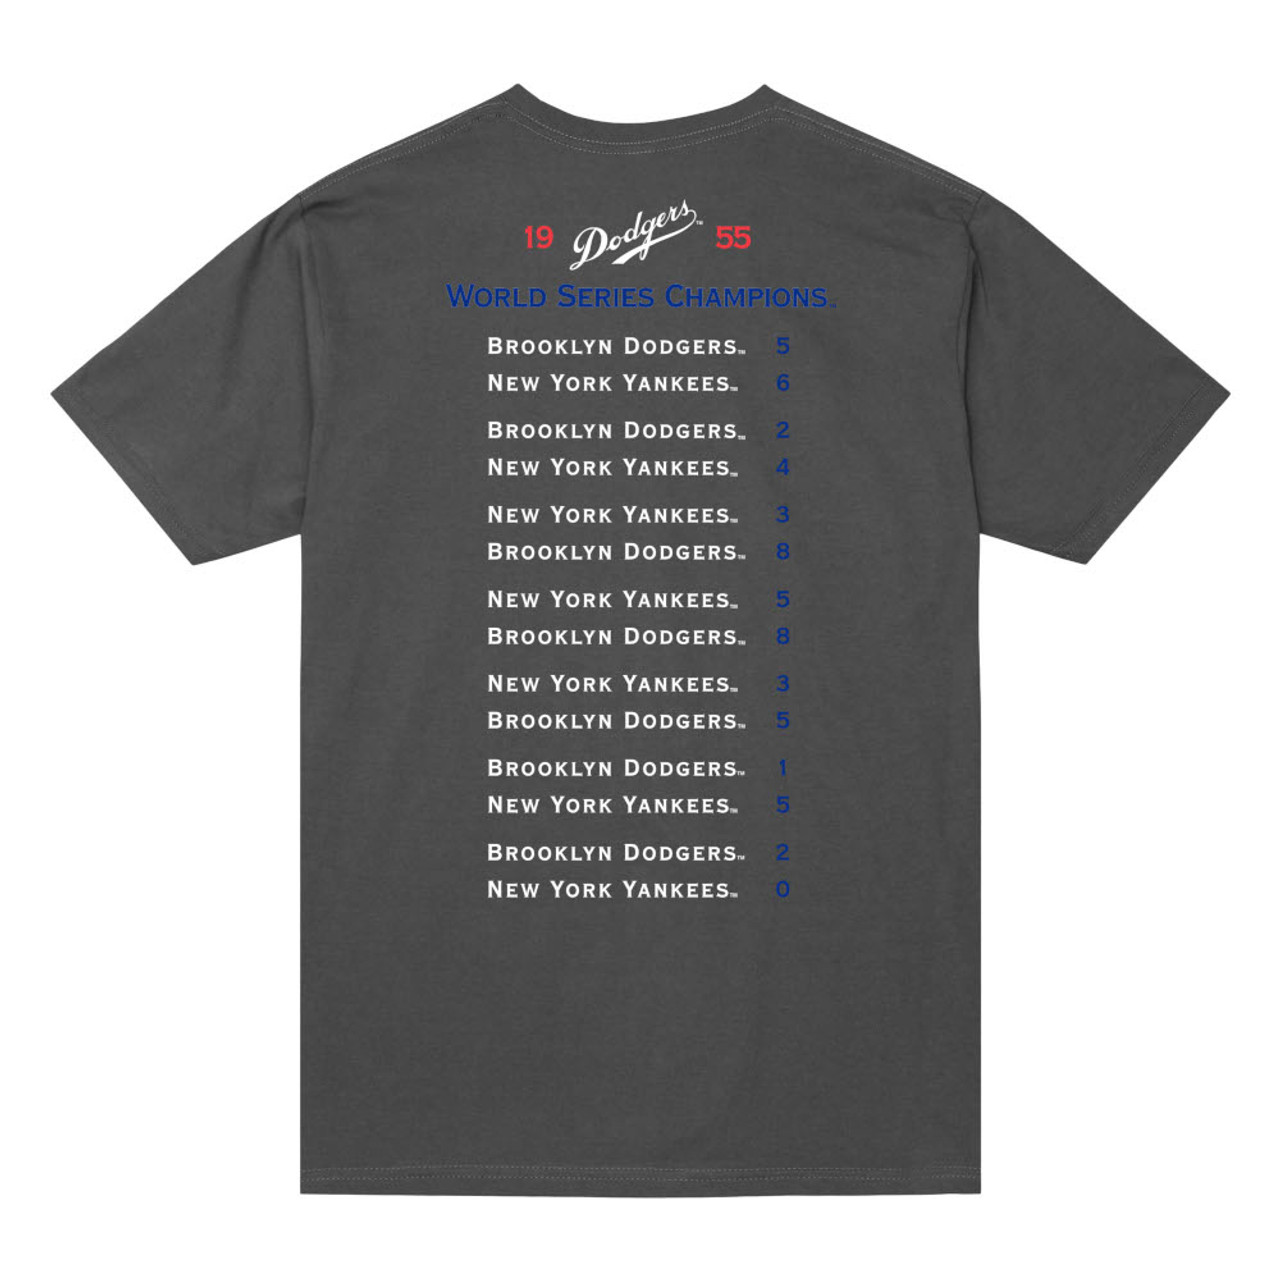 Los Angeles Dodgers Tee - Shop Mitchell & Ness Shirts and Apparel Mitchell  & Ness Nostalgia Co.